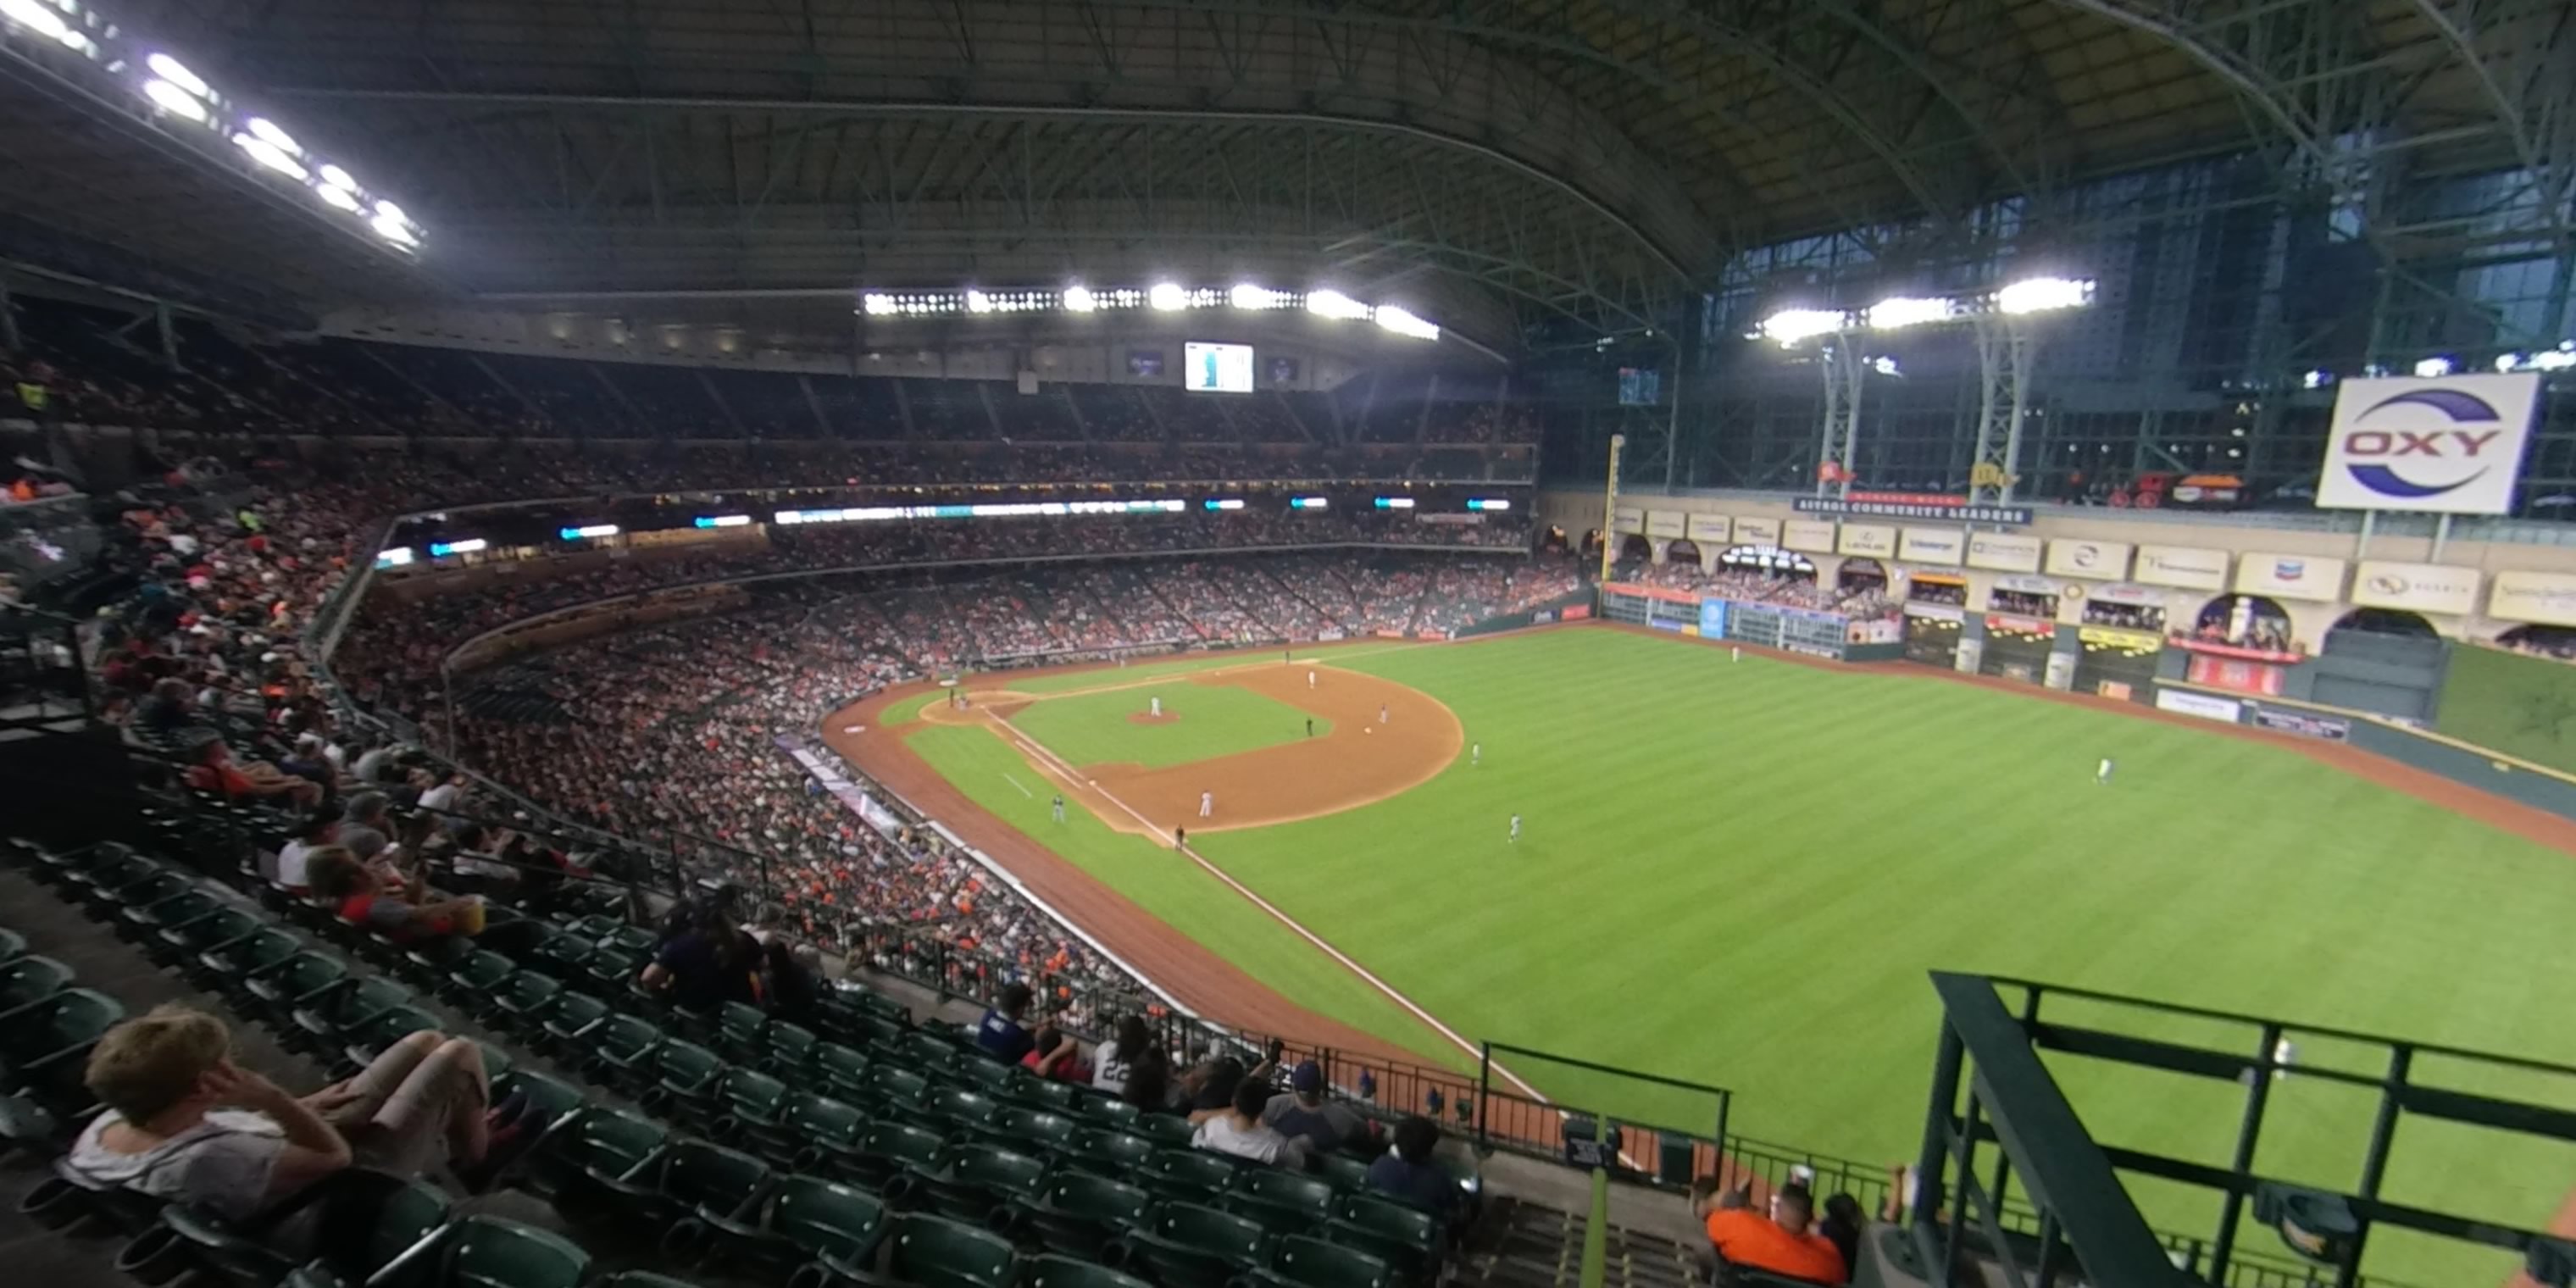 Section 333 at Minute Maid Park 